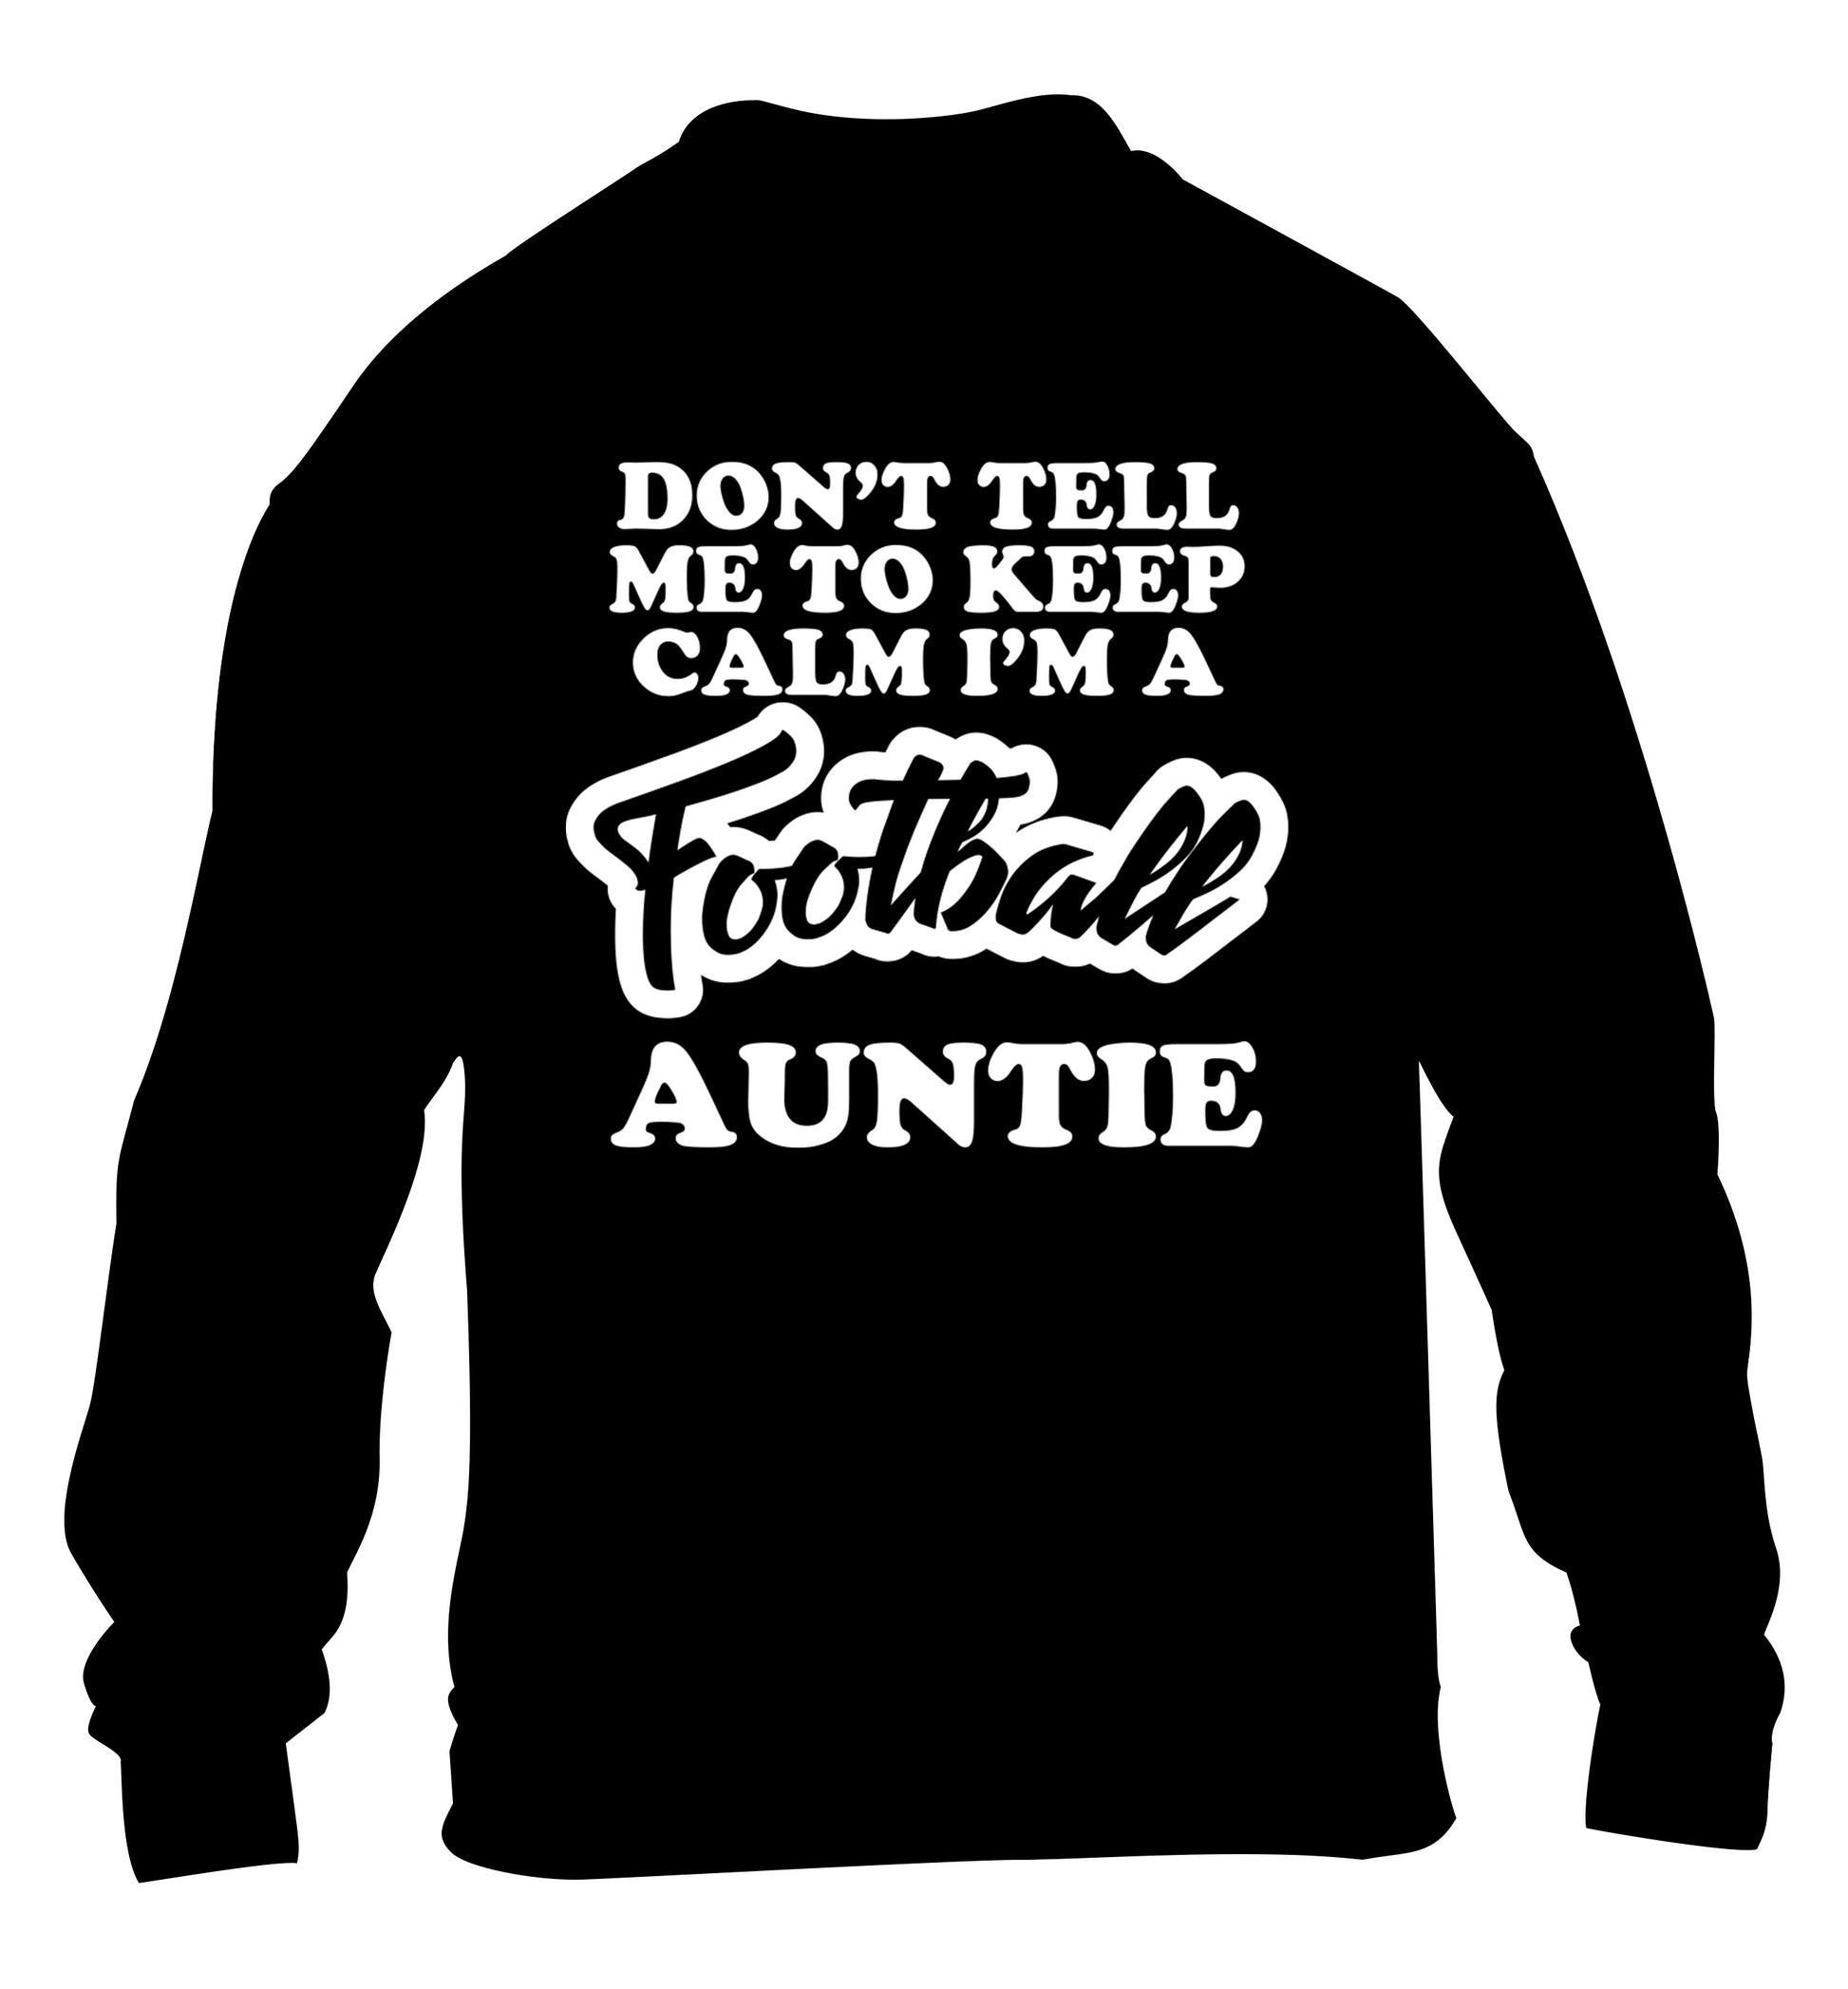 Don't tell me to keep calm I'm a football auntie children's black sweater 12-14 Years